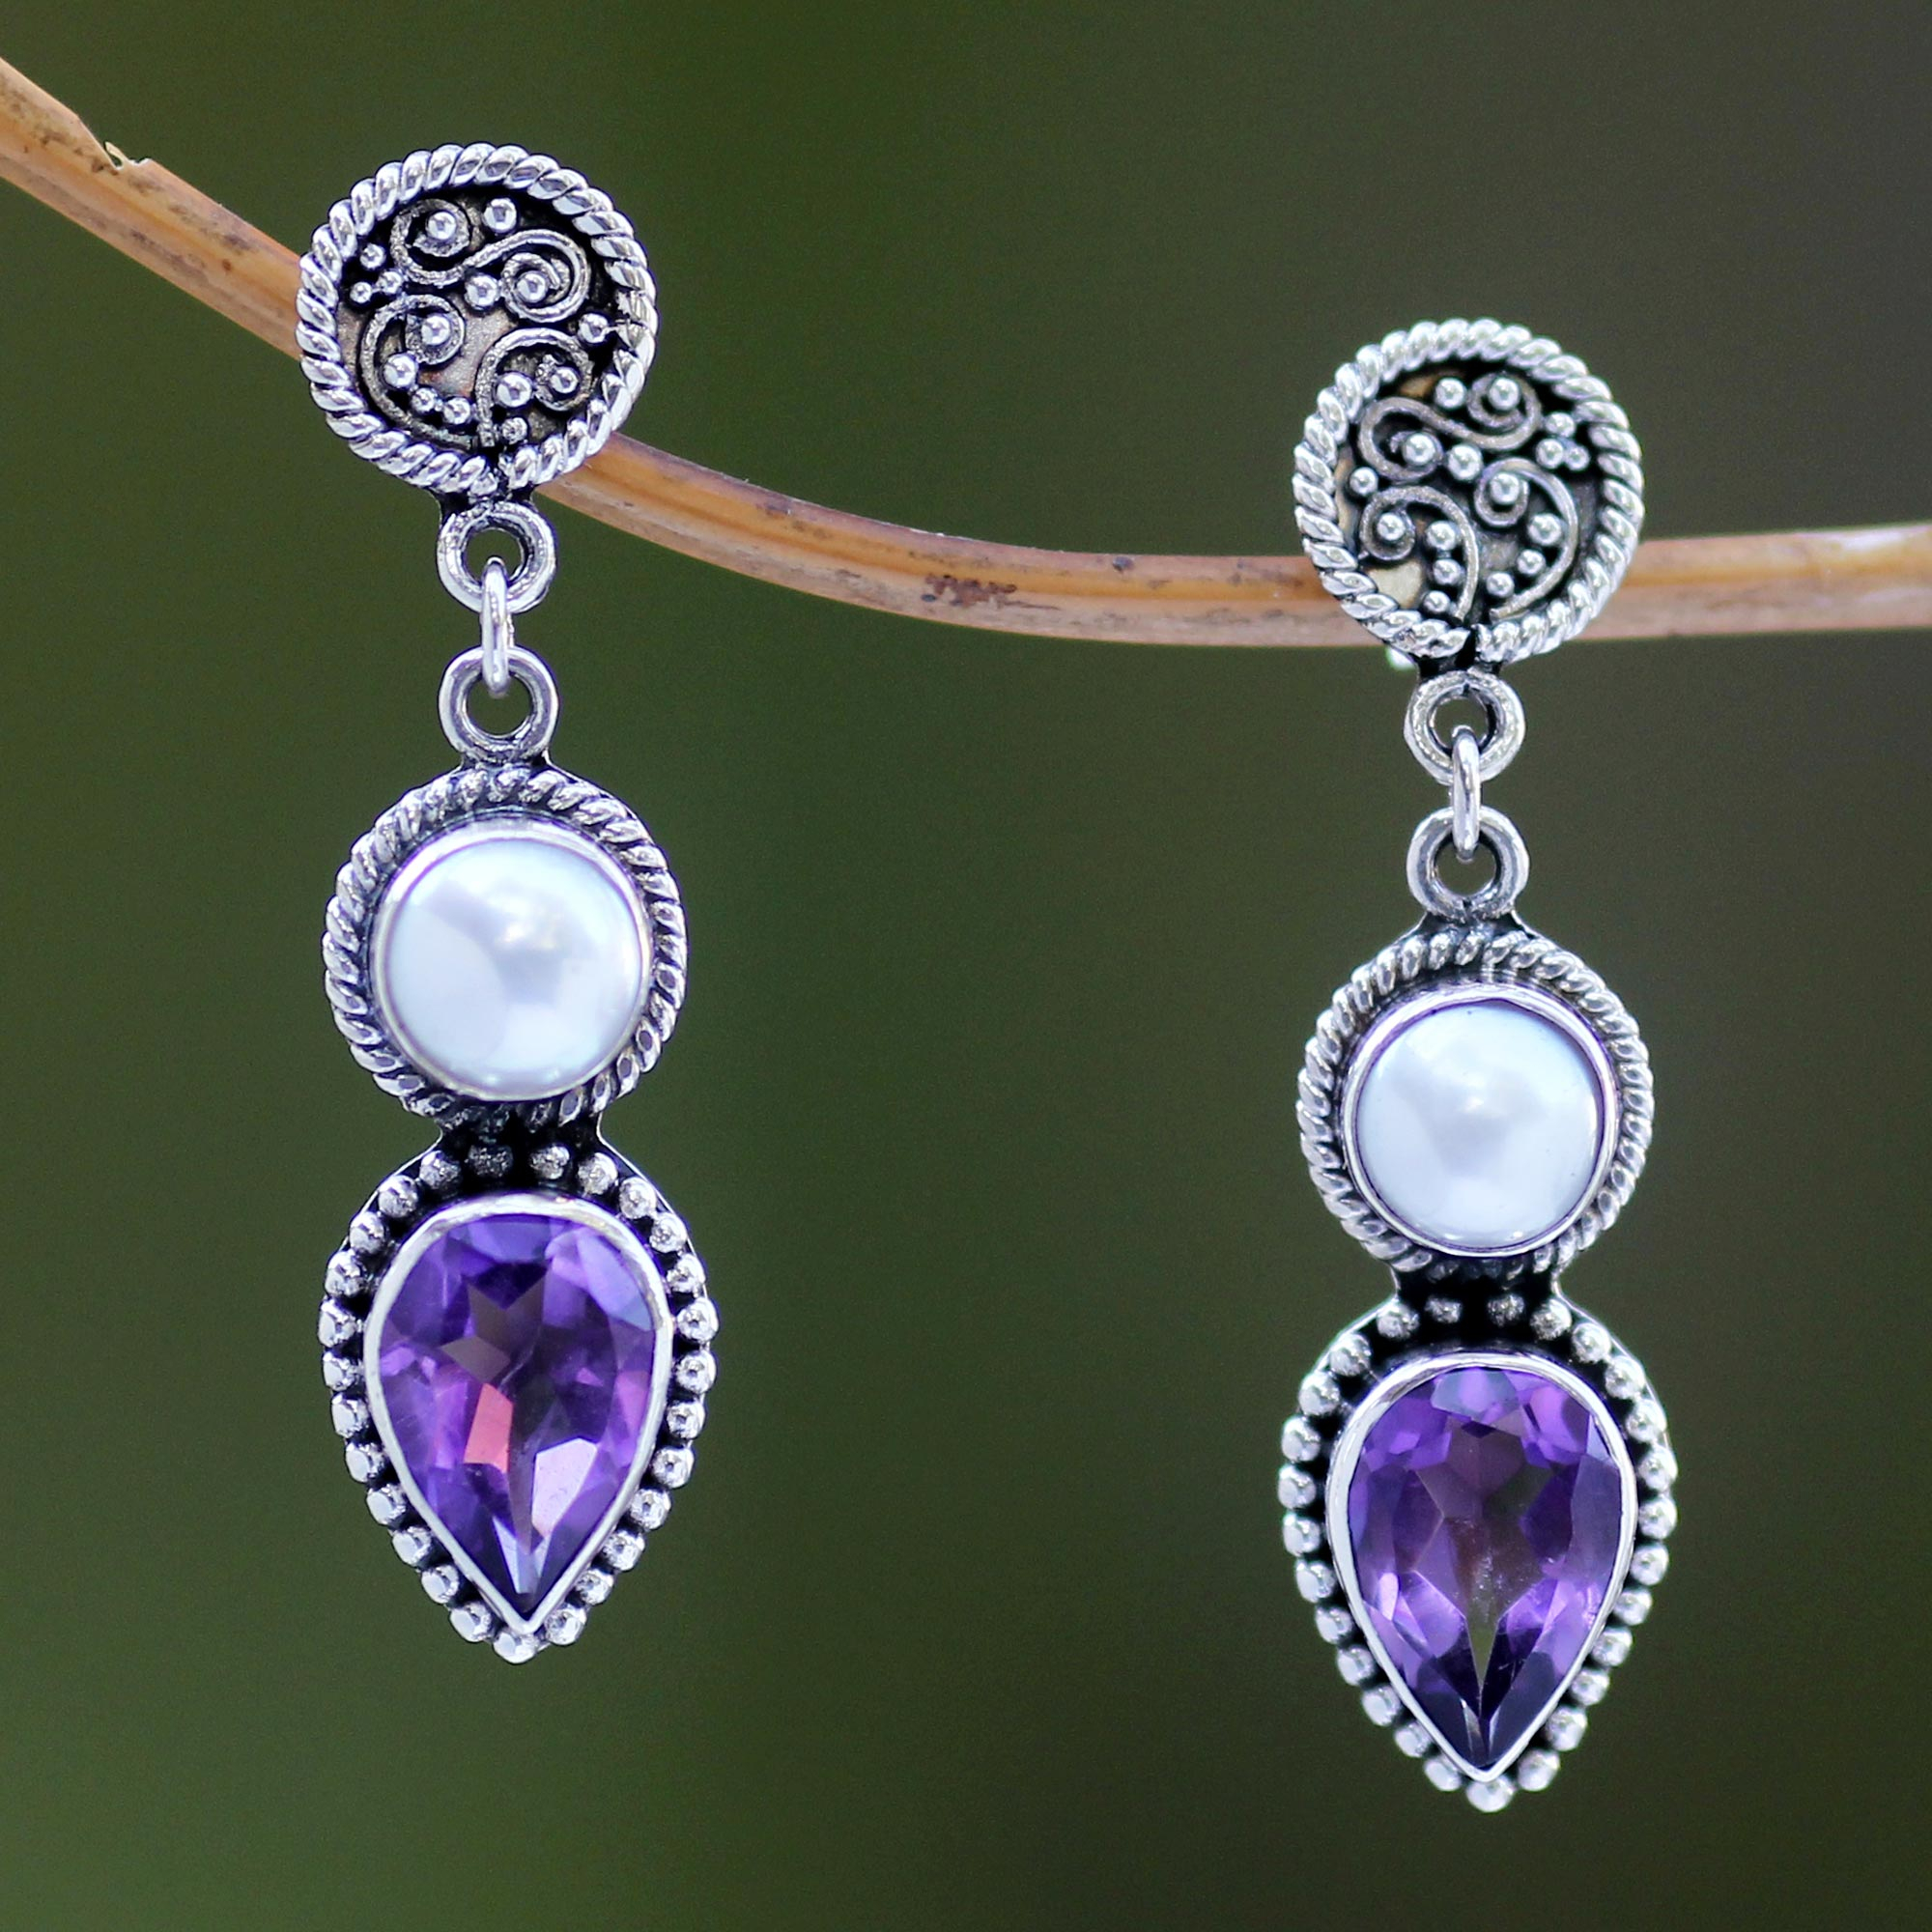 Details about  / Cultured Pearl and Amethyst Round 925 Sterling Silver Dangle Earrings